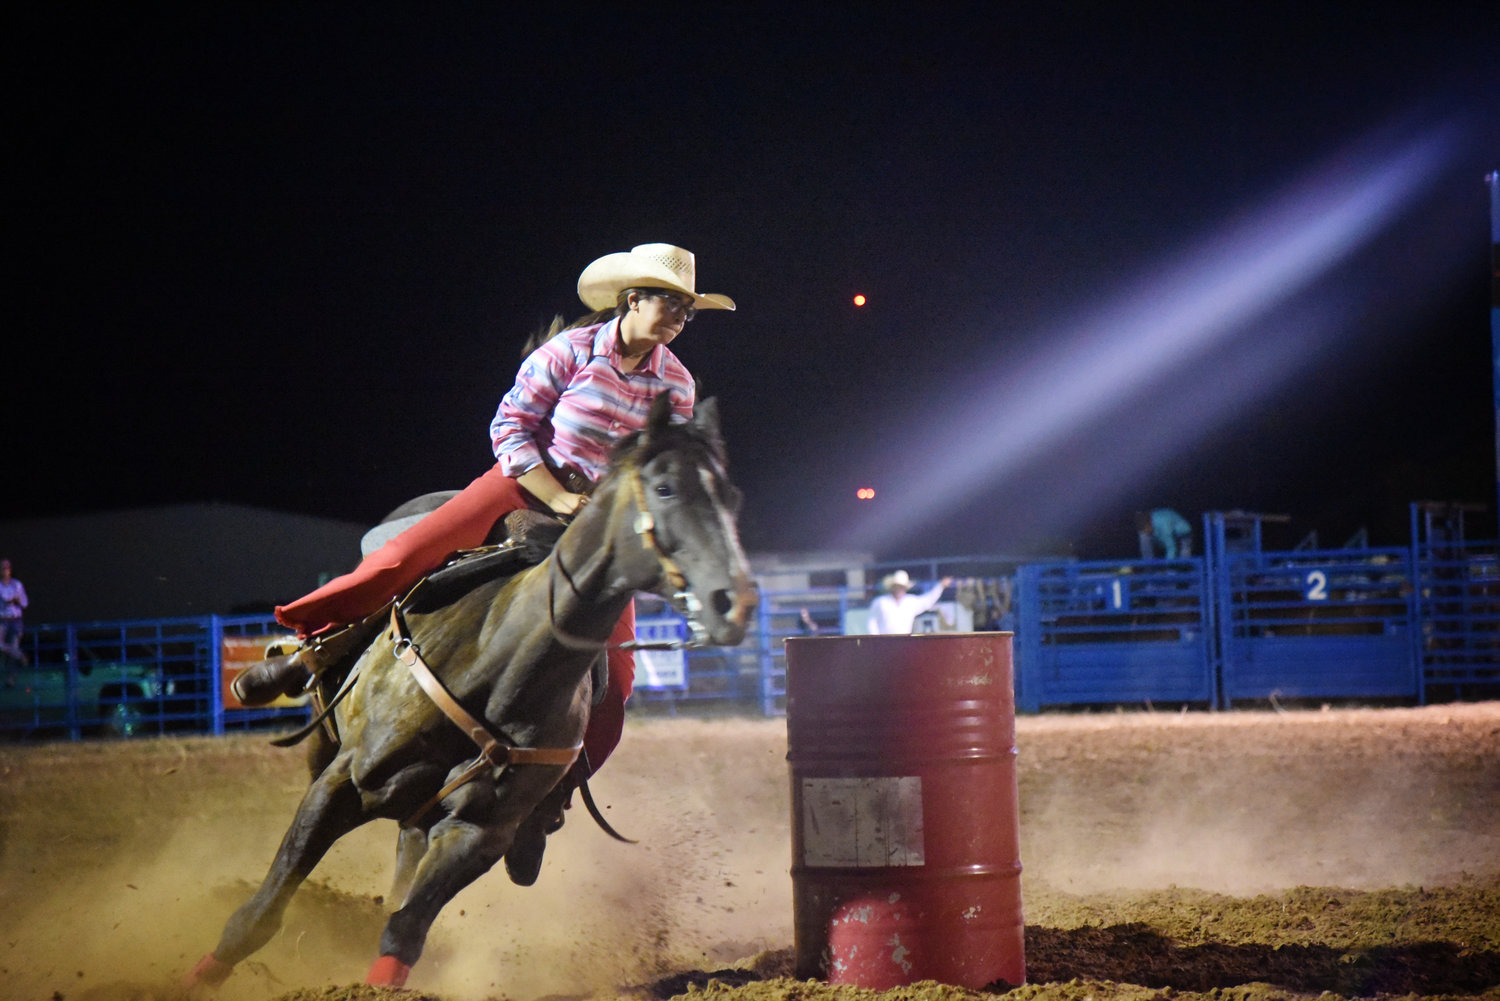 Kennadi Wofford entered the barrel race contest at the Operation C.A.R.E. rodeo held Aug. 5 and Aug. 6, 2022.